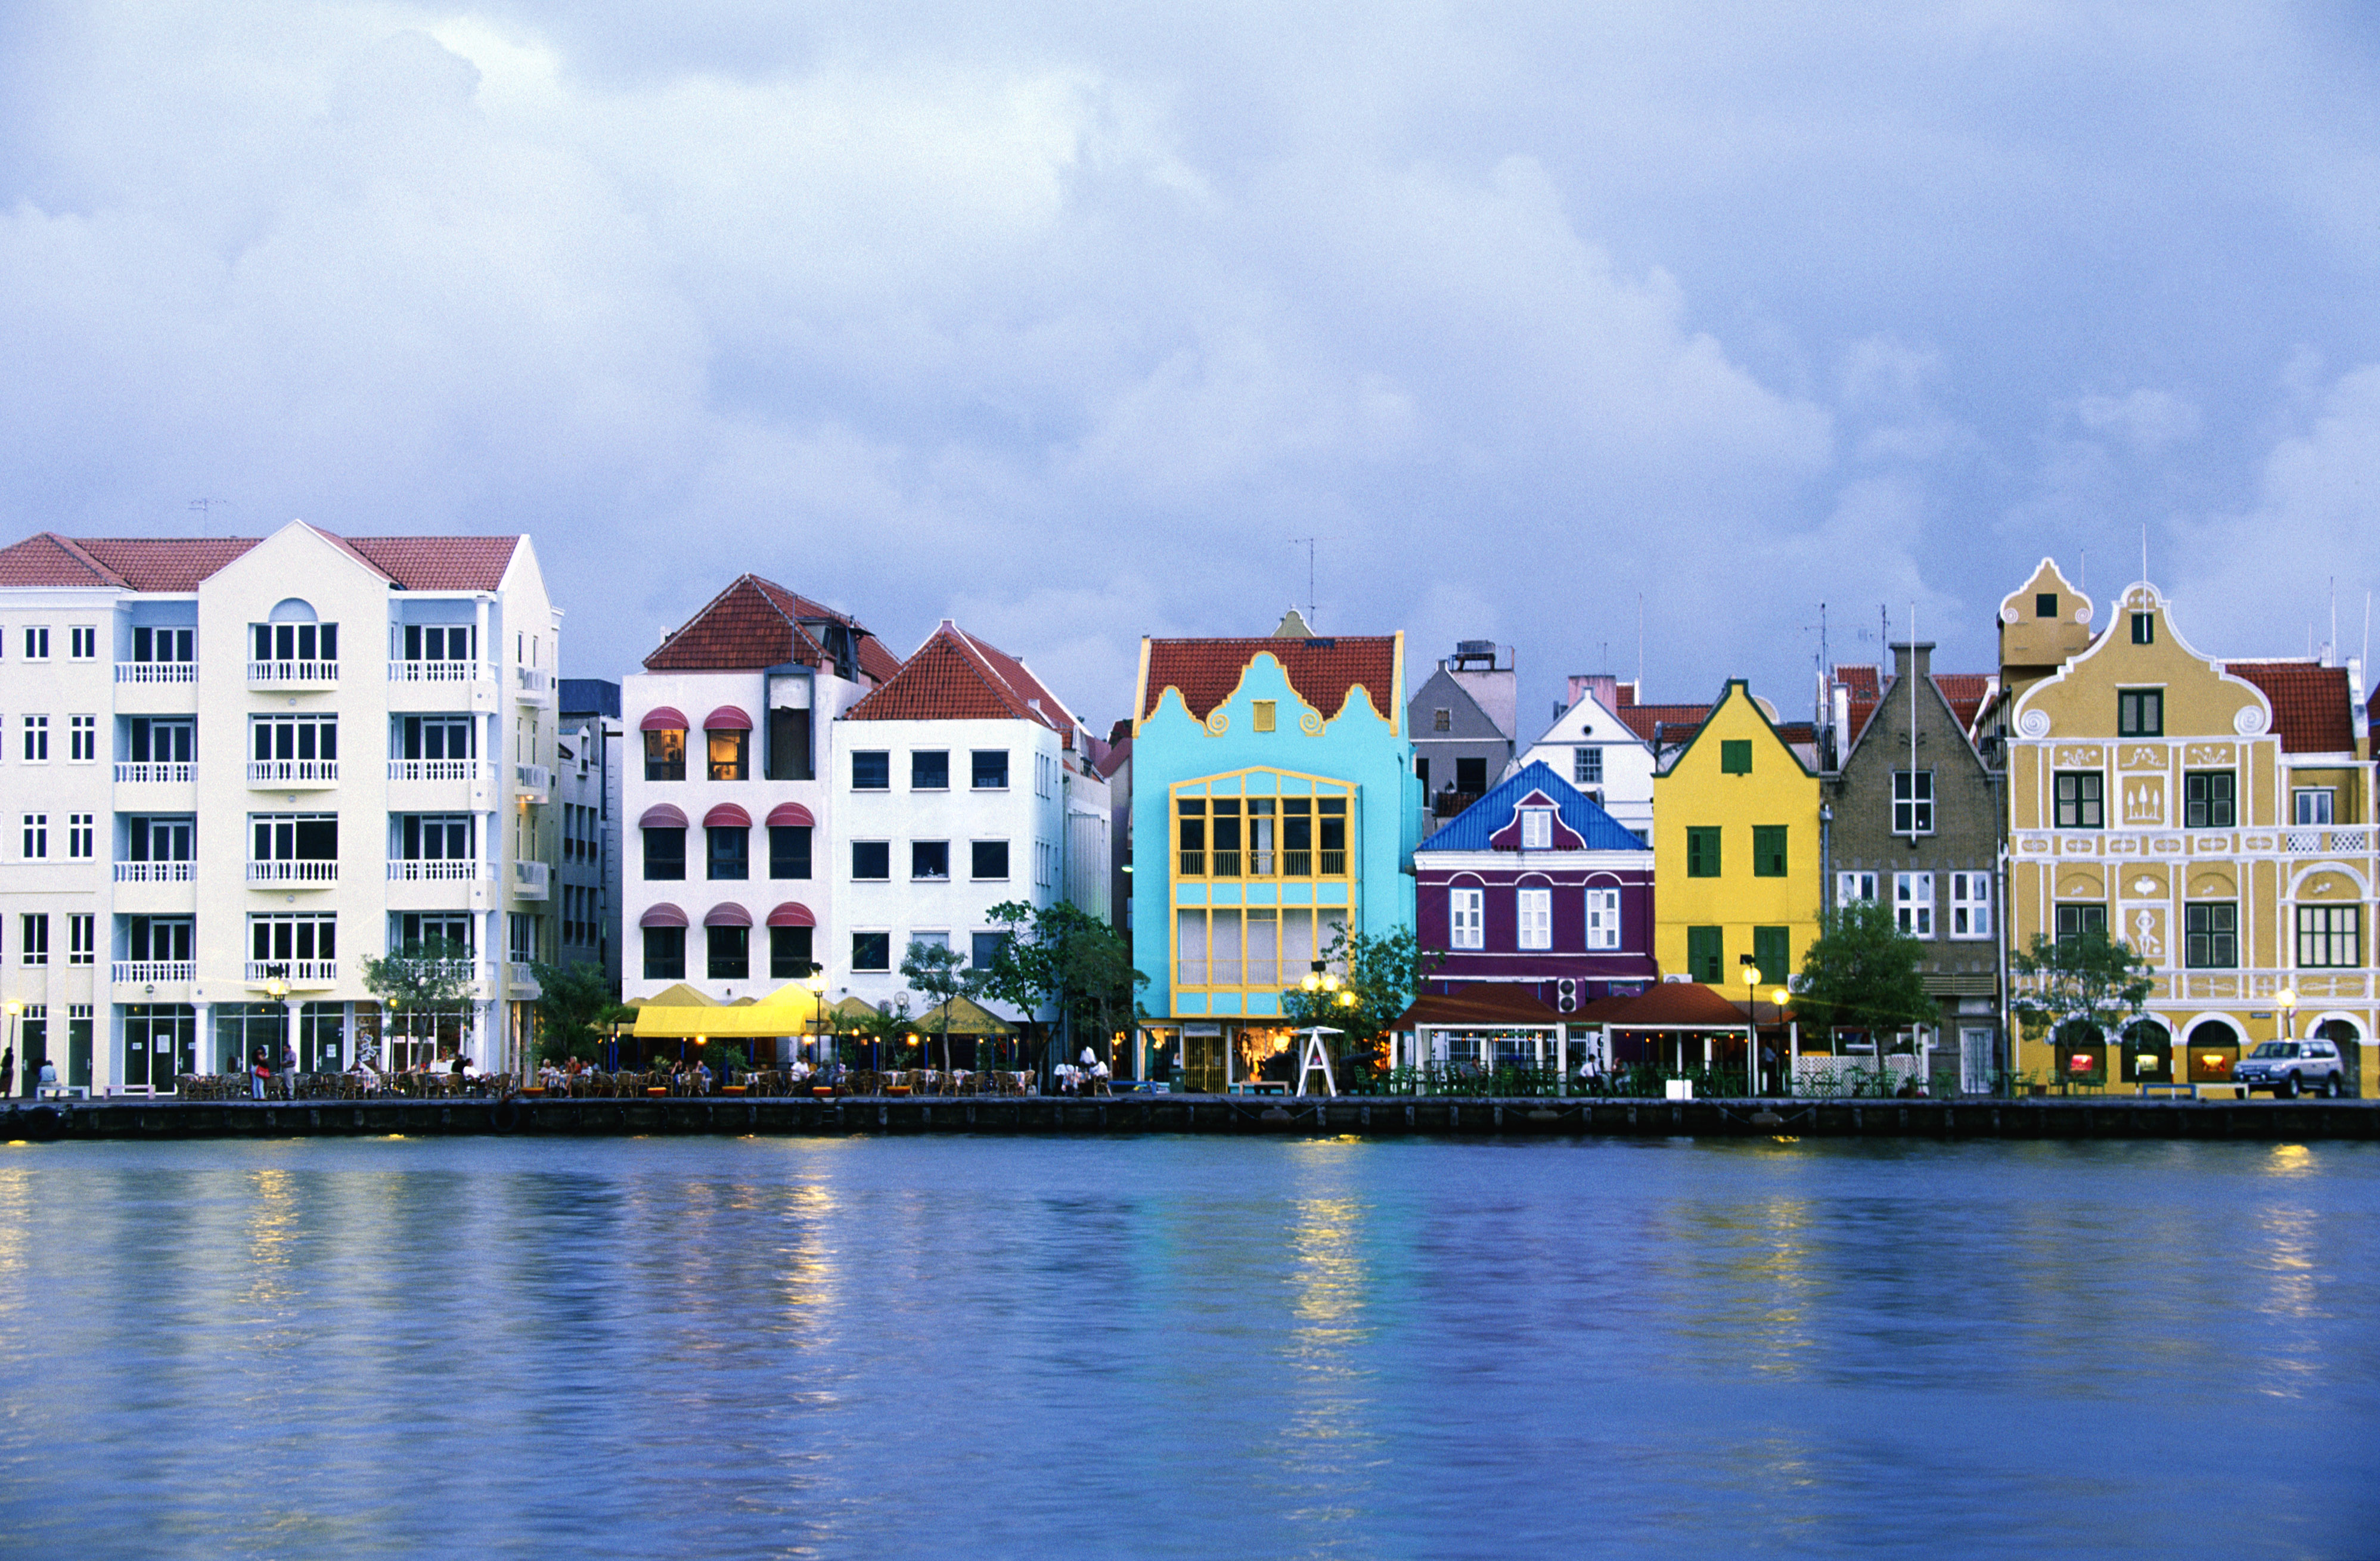 Willemstad waterfront, Curacao